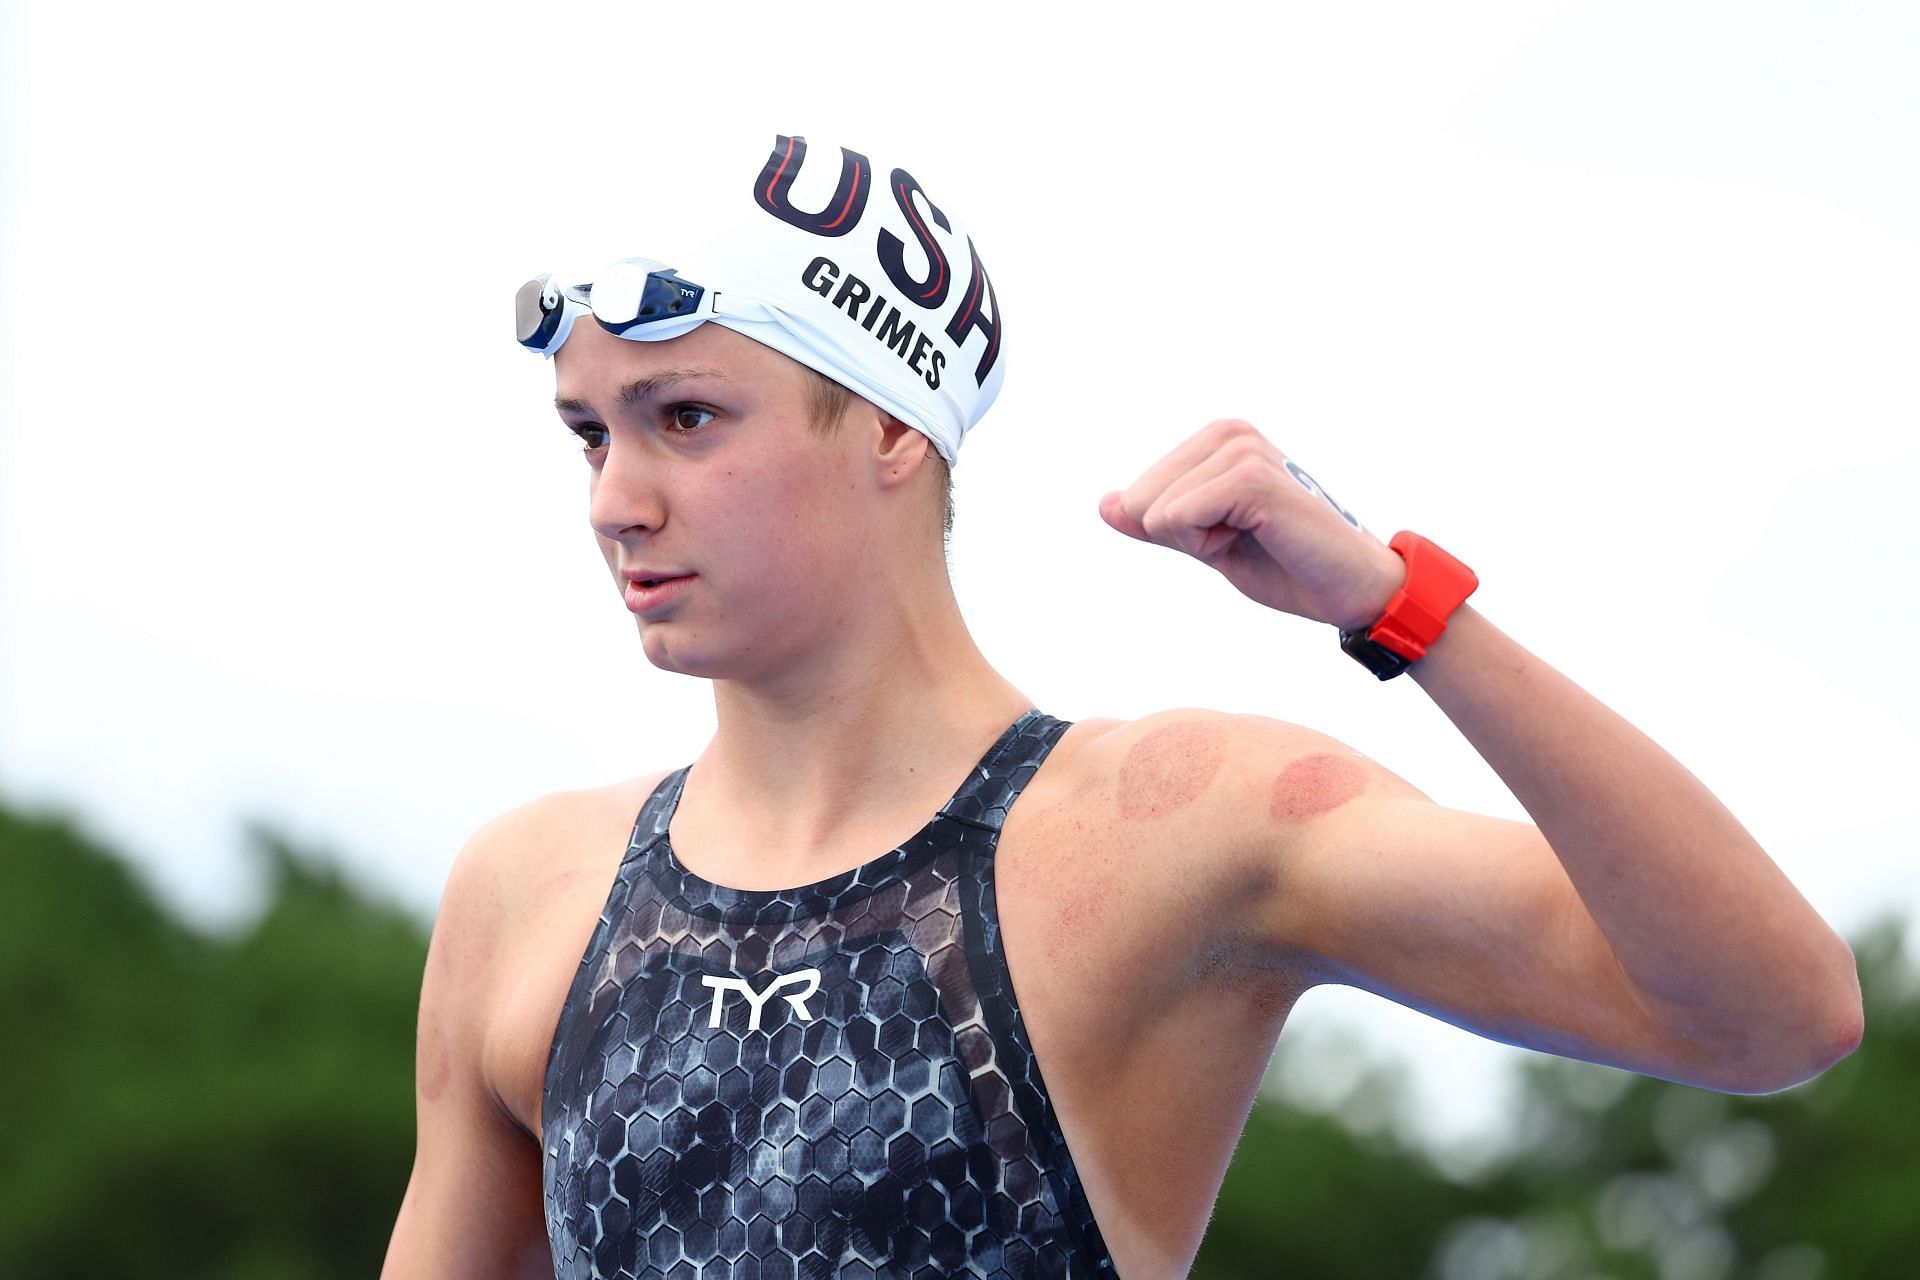 Katie Grimes of Team United States prepares in the Open Water 4x1500m Mixed Relay at the 2023 World Aquatics Championships at Seaside Momochi Beach Park in Fukuoka, Japan.